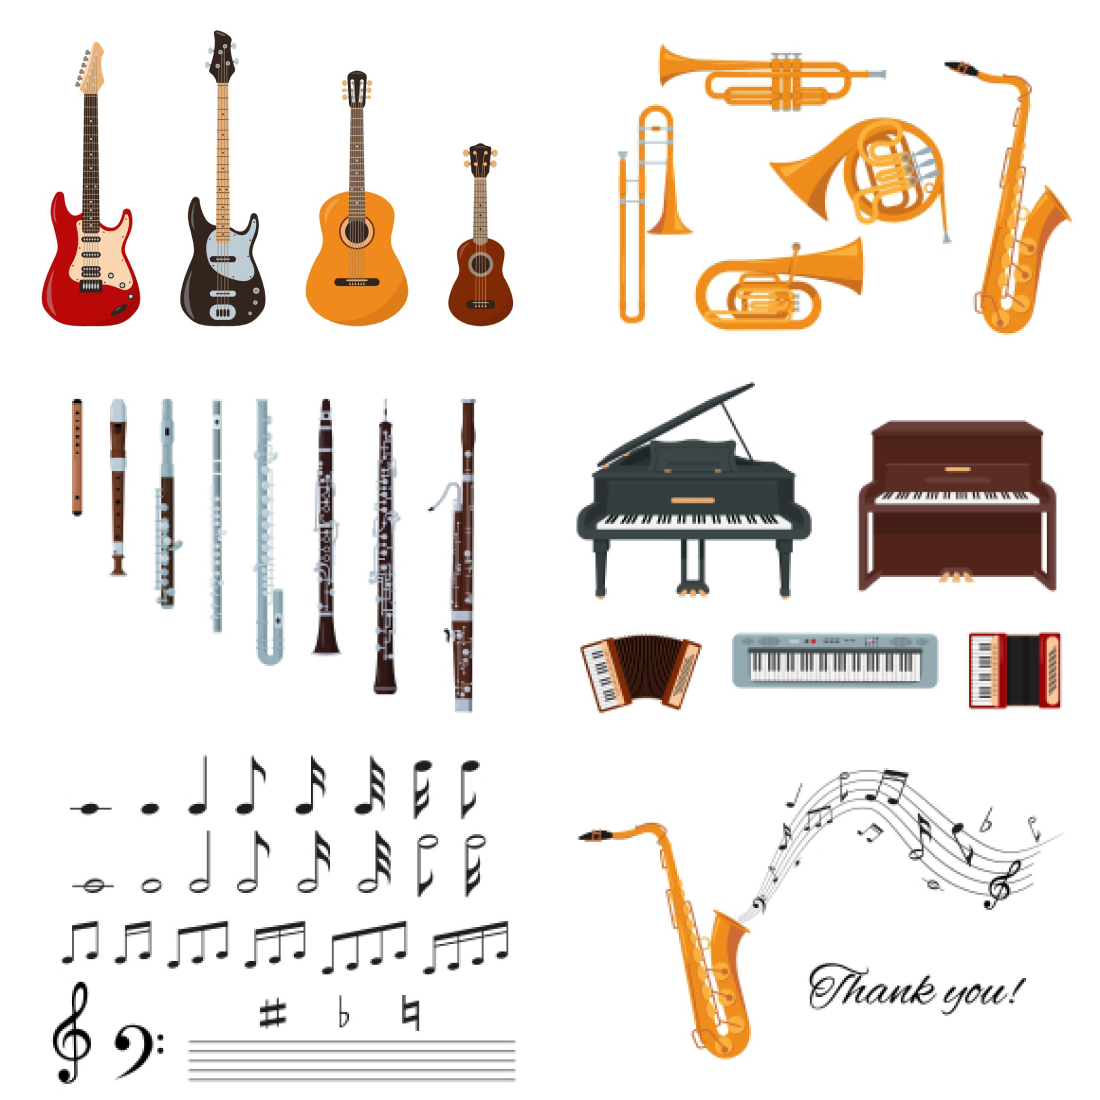 Musical instruments and notes cover.